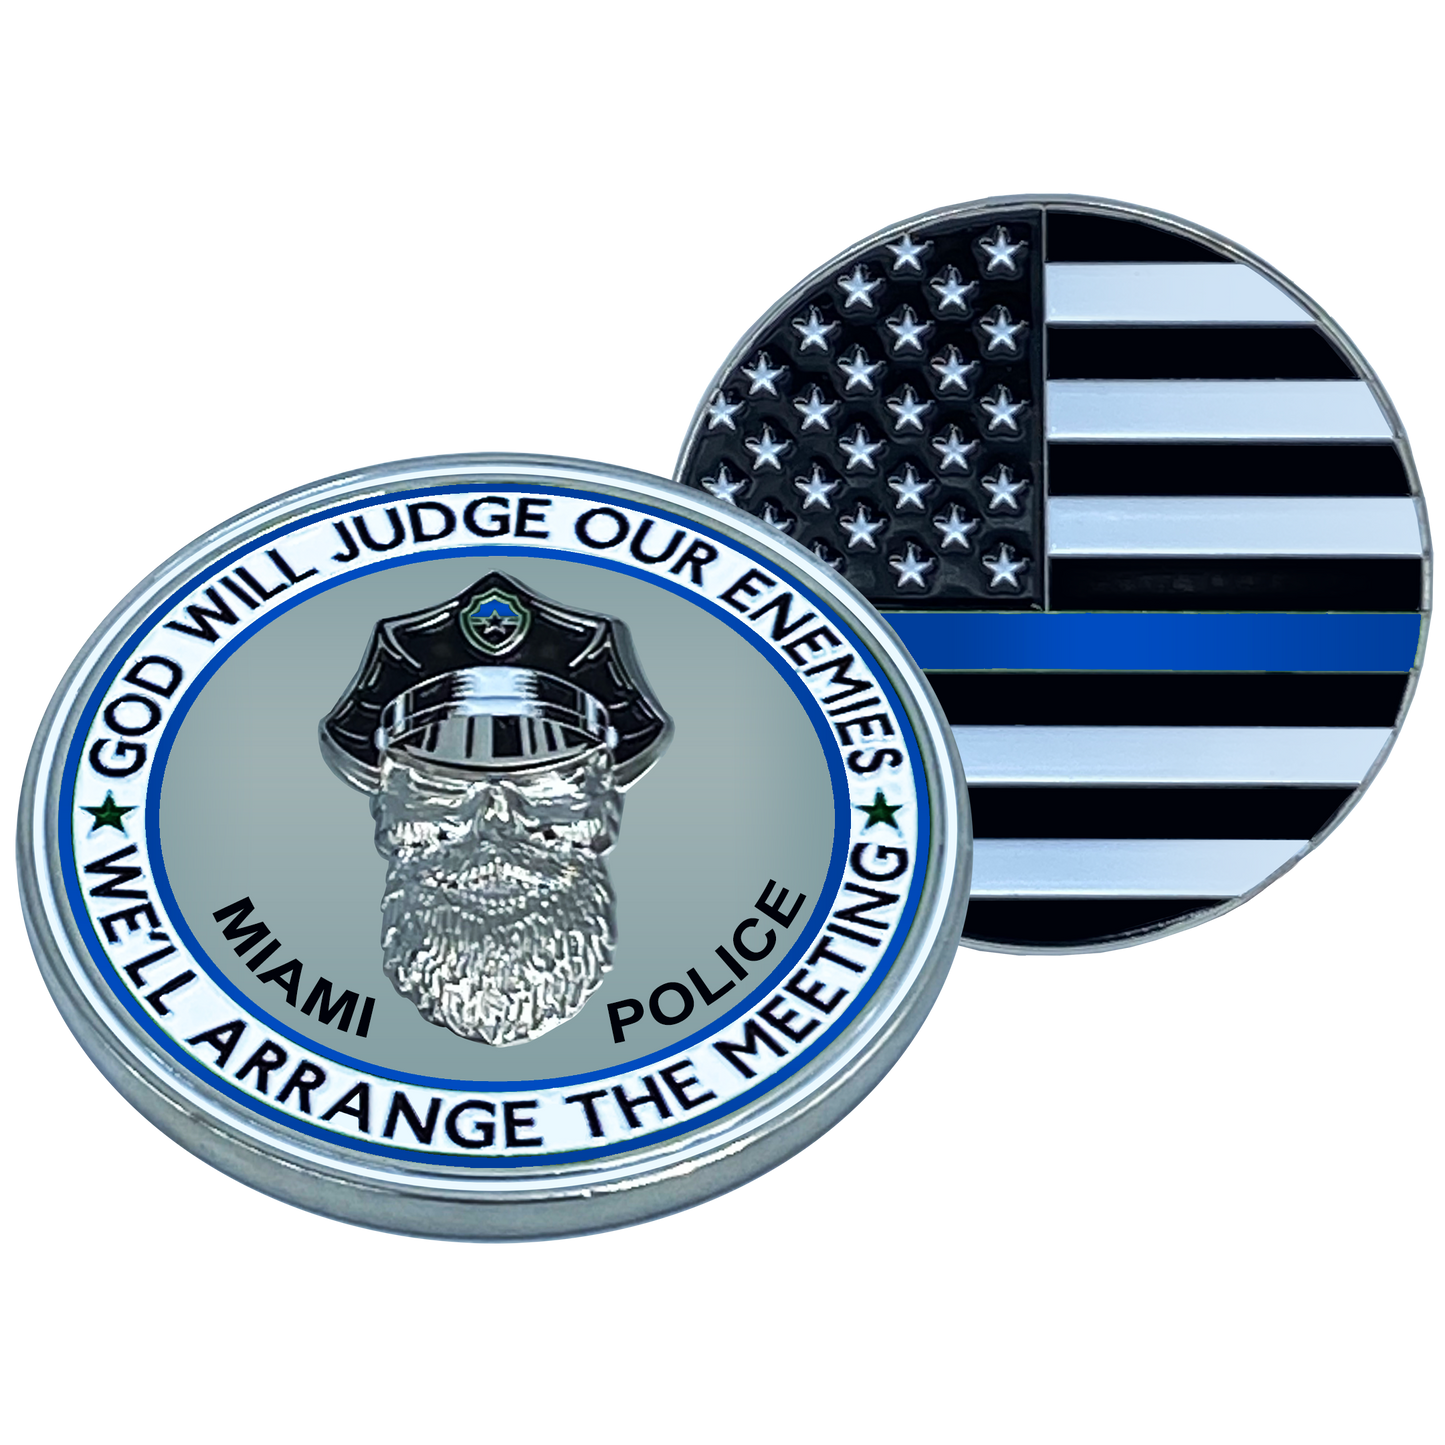 EL1-005 Thin Blue Line Miami Police God Will Judge BEARD GANG SKULL Challenge Coin City of Police Department Miami Beach Dade South Back the Blue